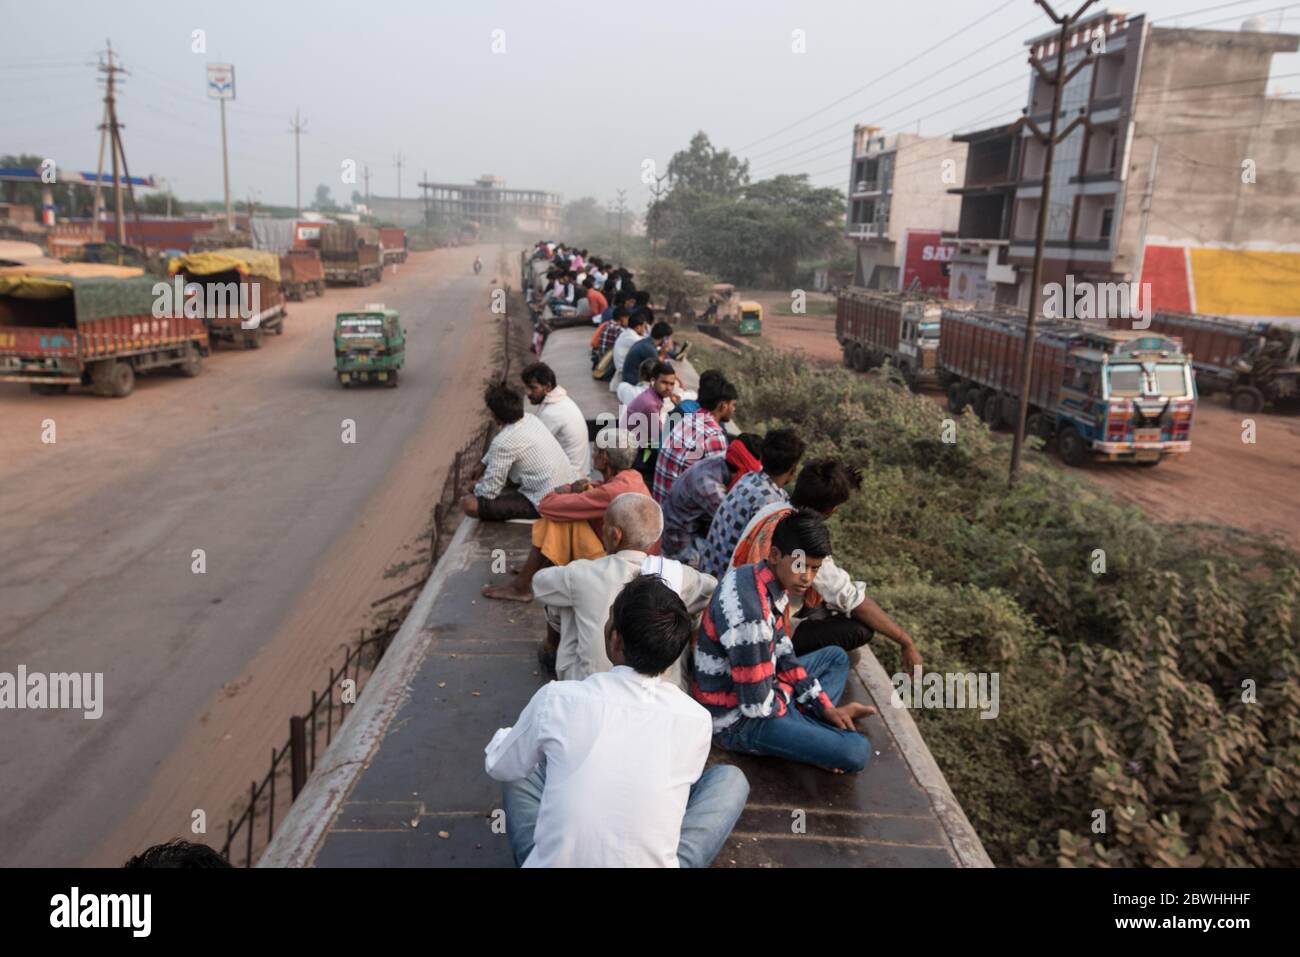 Men on top of overcrowded train passes through a small town in Madhya Pradesh, India. Indian Railways. Stock Photo